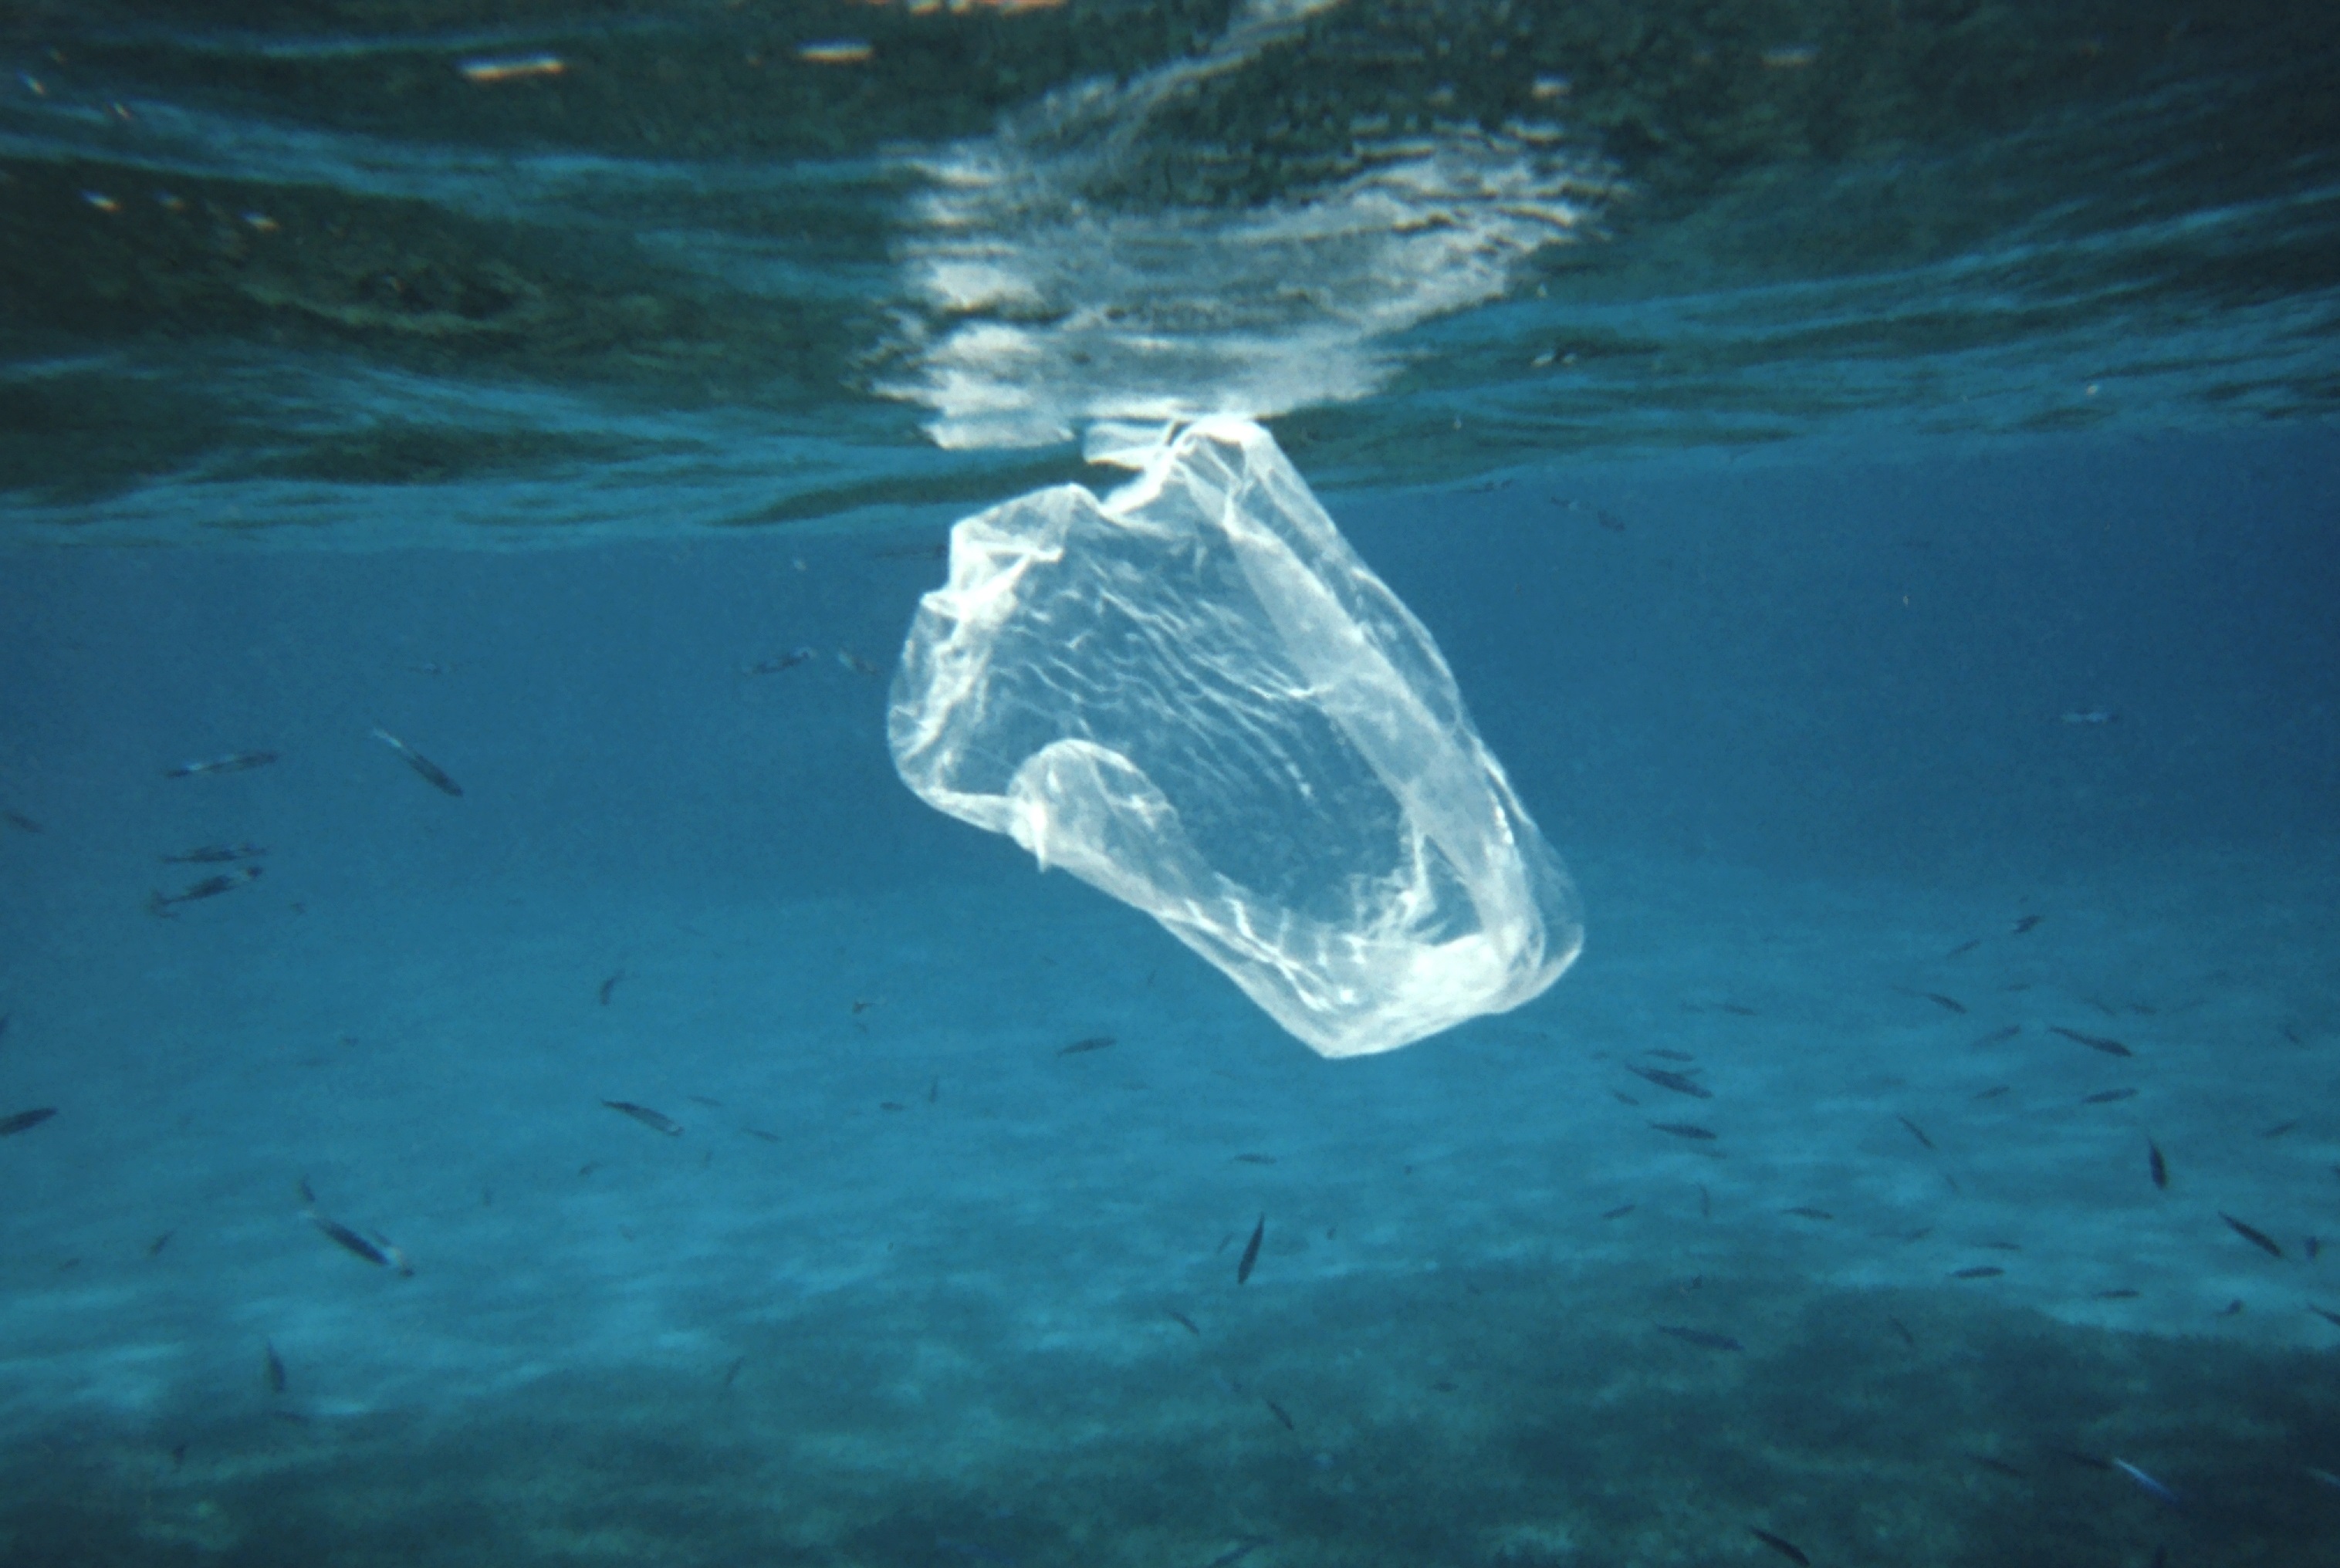 Macrofouling communities and the degradation of plastic bags in the sea: an in situ experiment